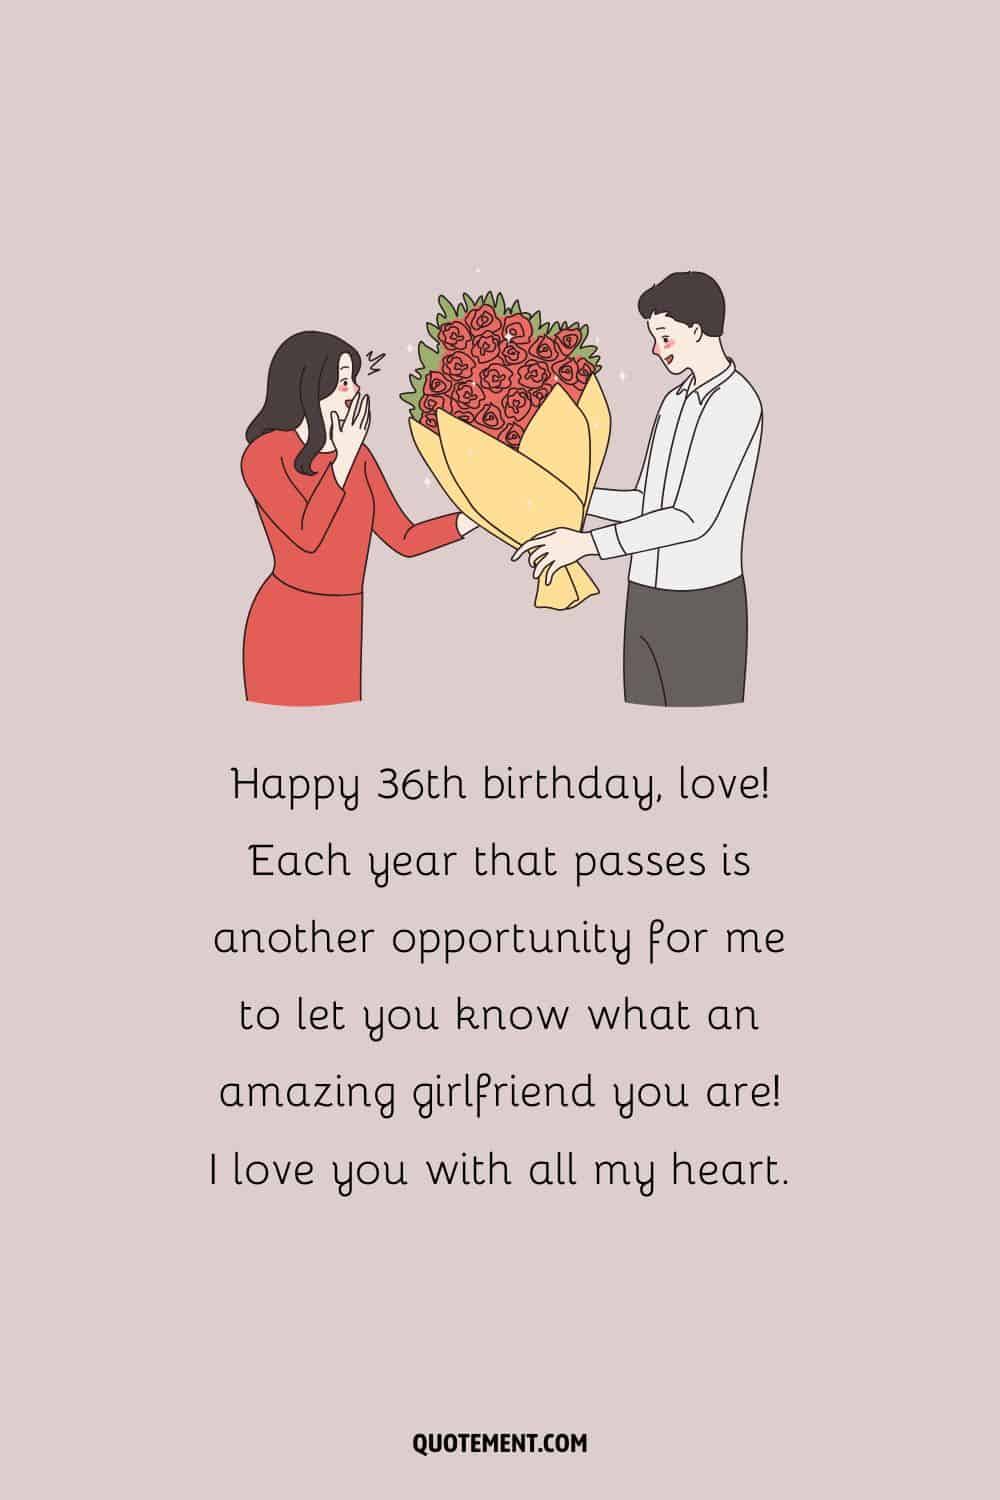 Illustration of a couple representing birthday message for a wife or girlfriend.